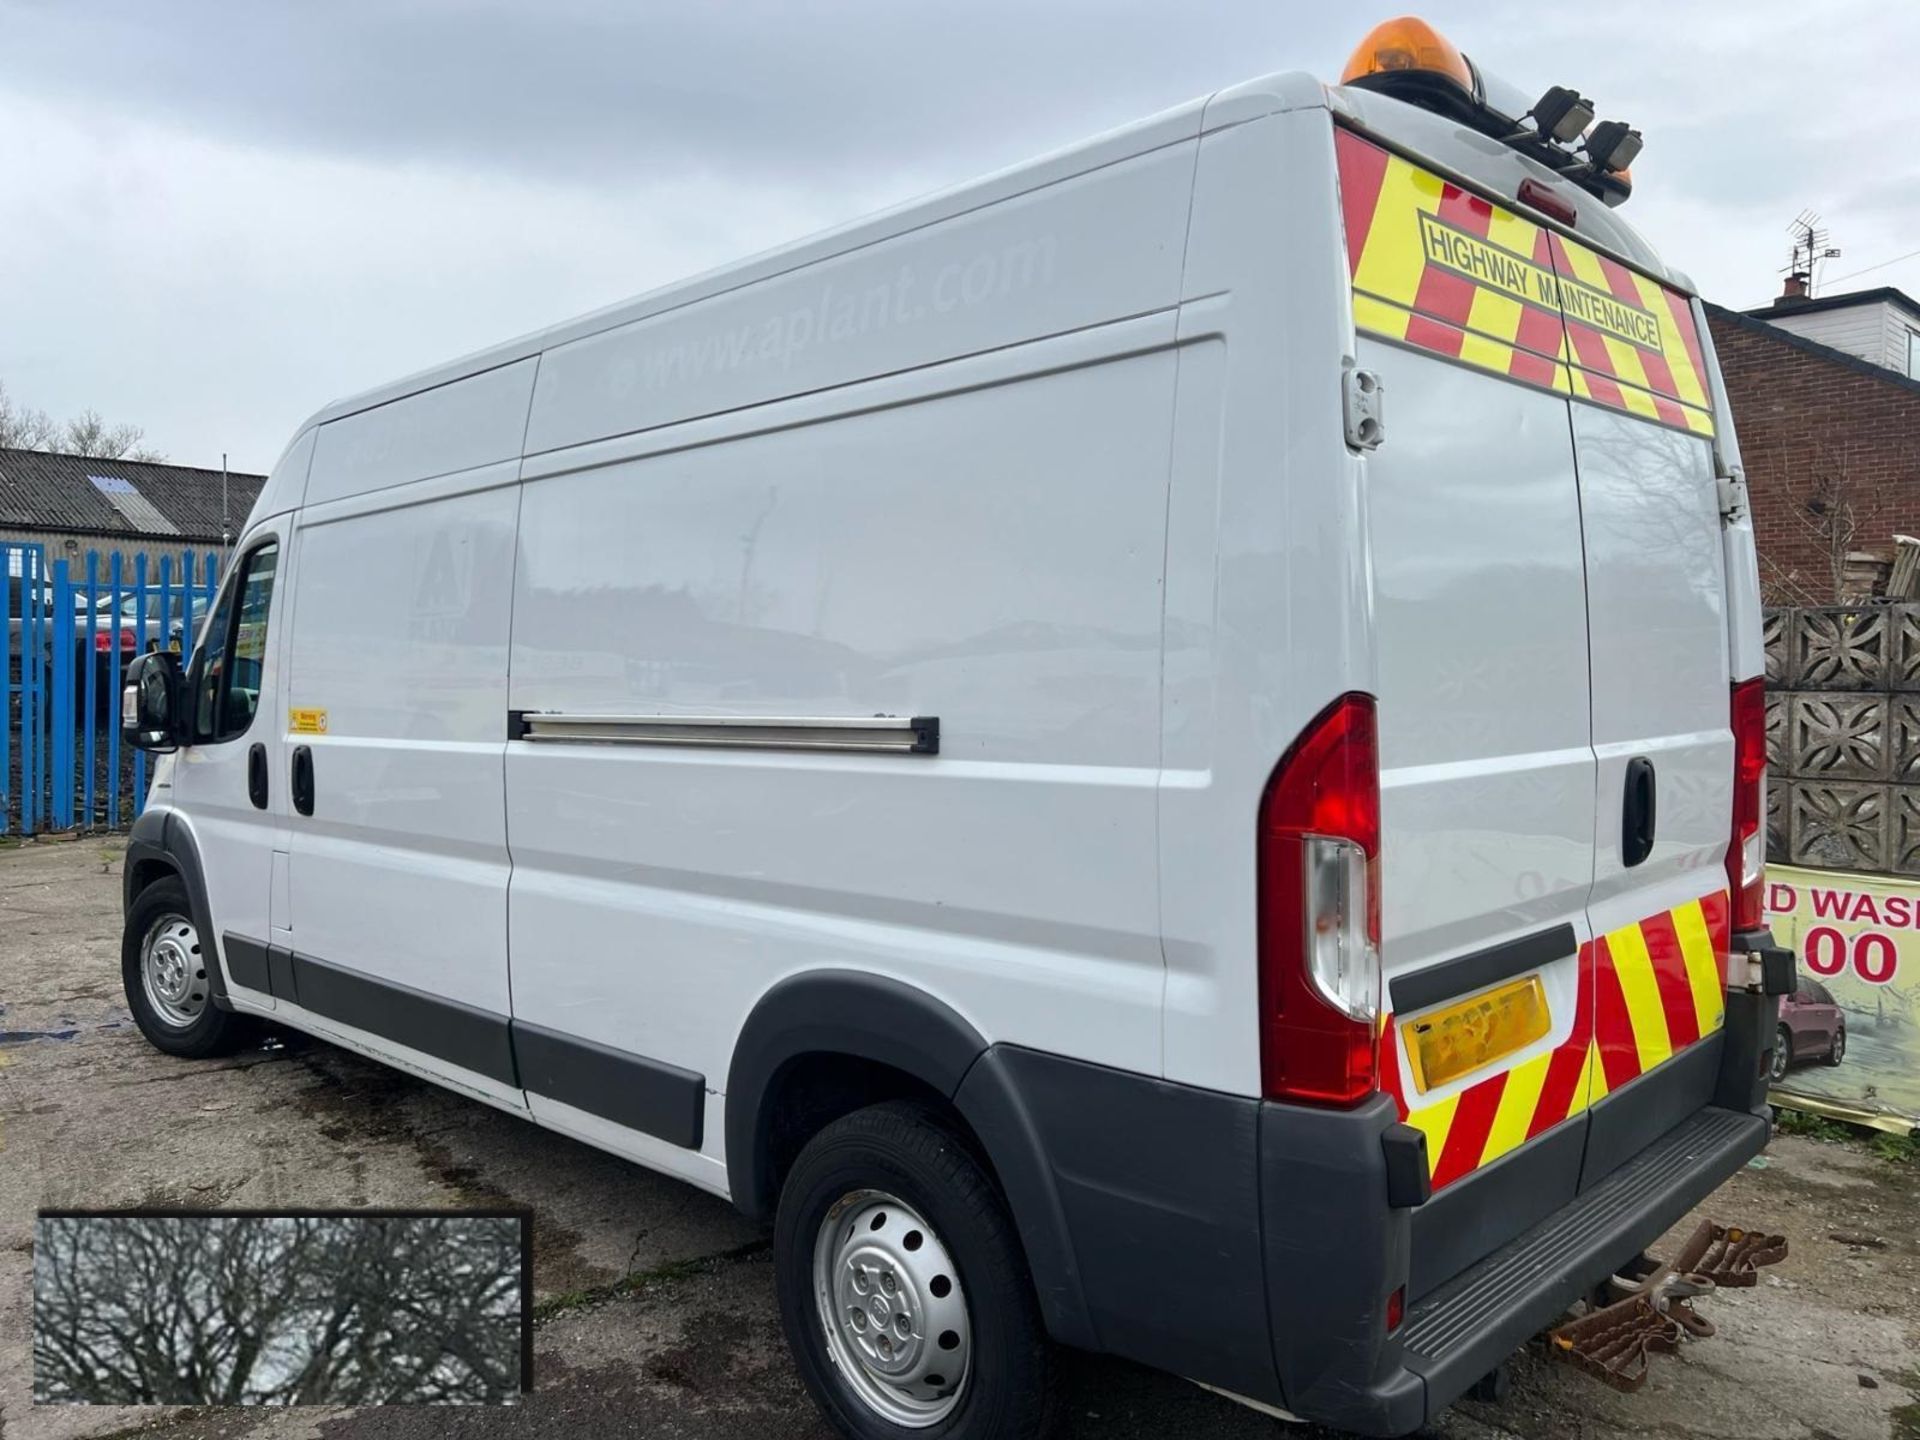 2017 FIAT DUCATO LWB L3 H2 PANEL VAN READY FOR ACTION! - Image 4 of 14